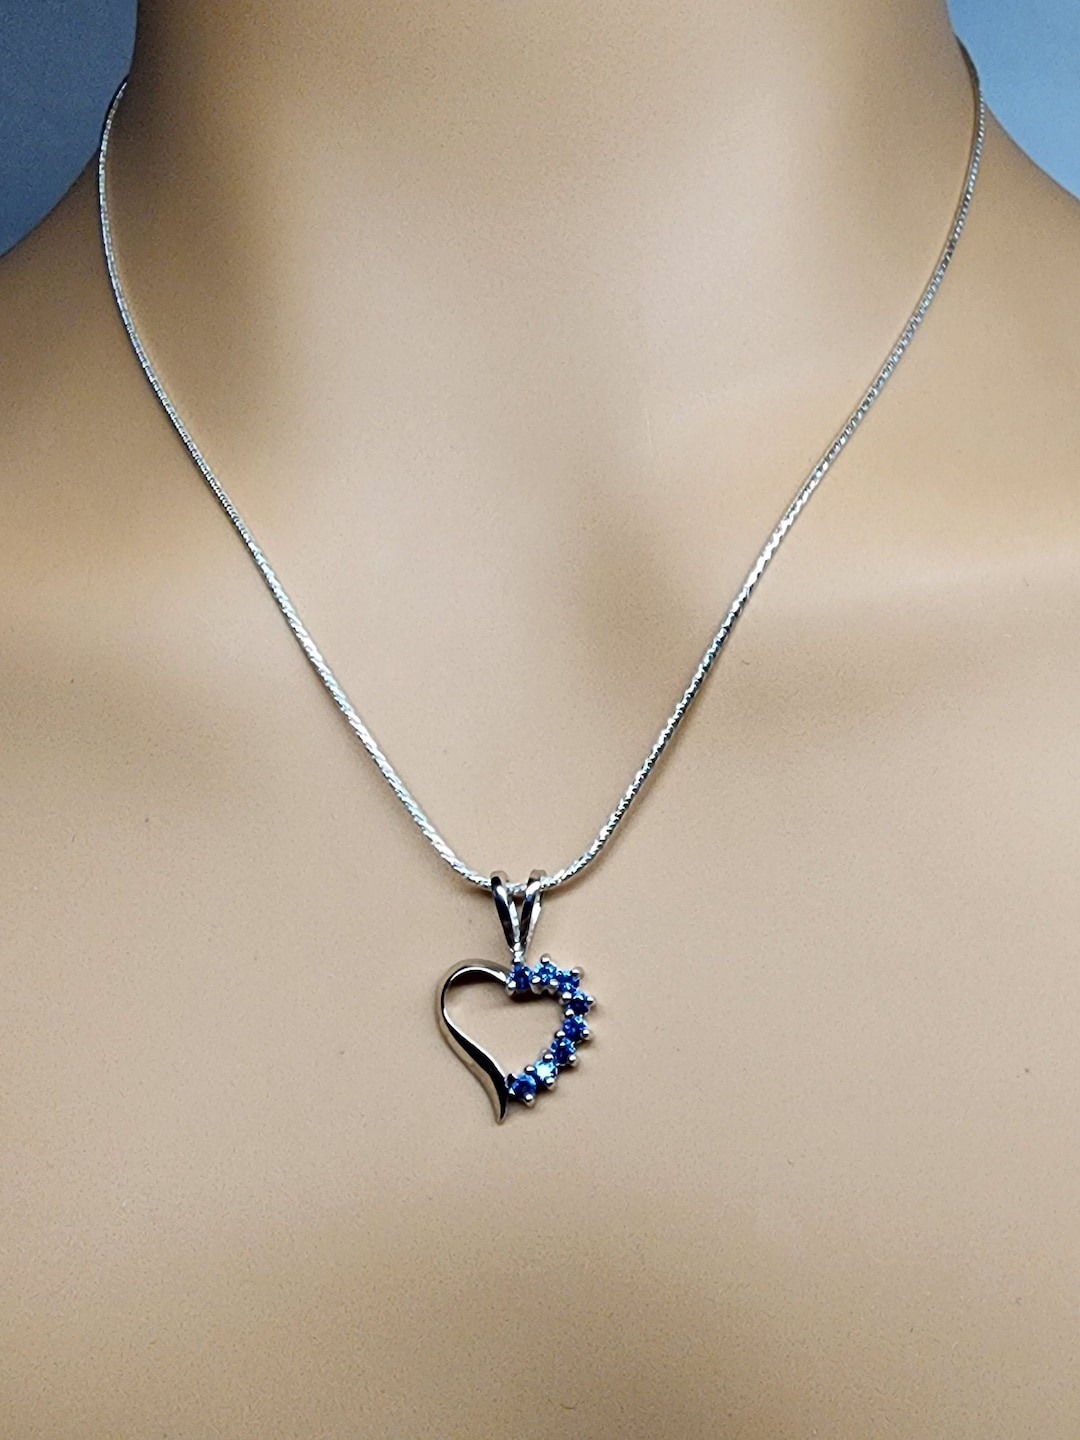 Sterling Silver Heart Necklace Blue CZ Accents - Etsy